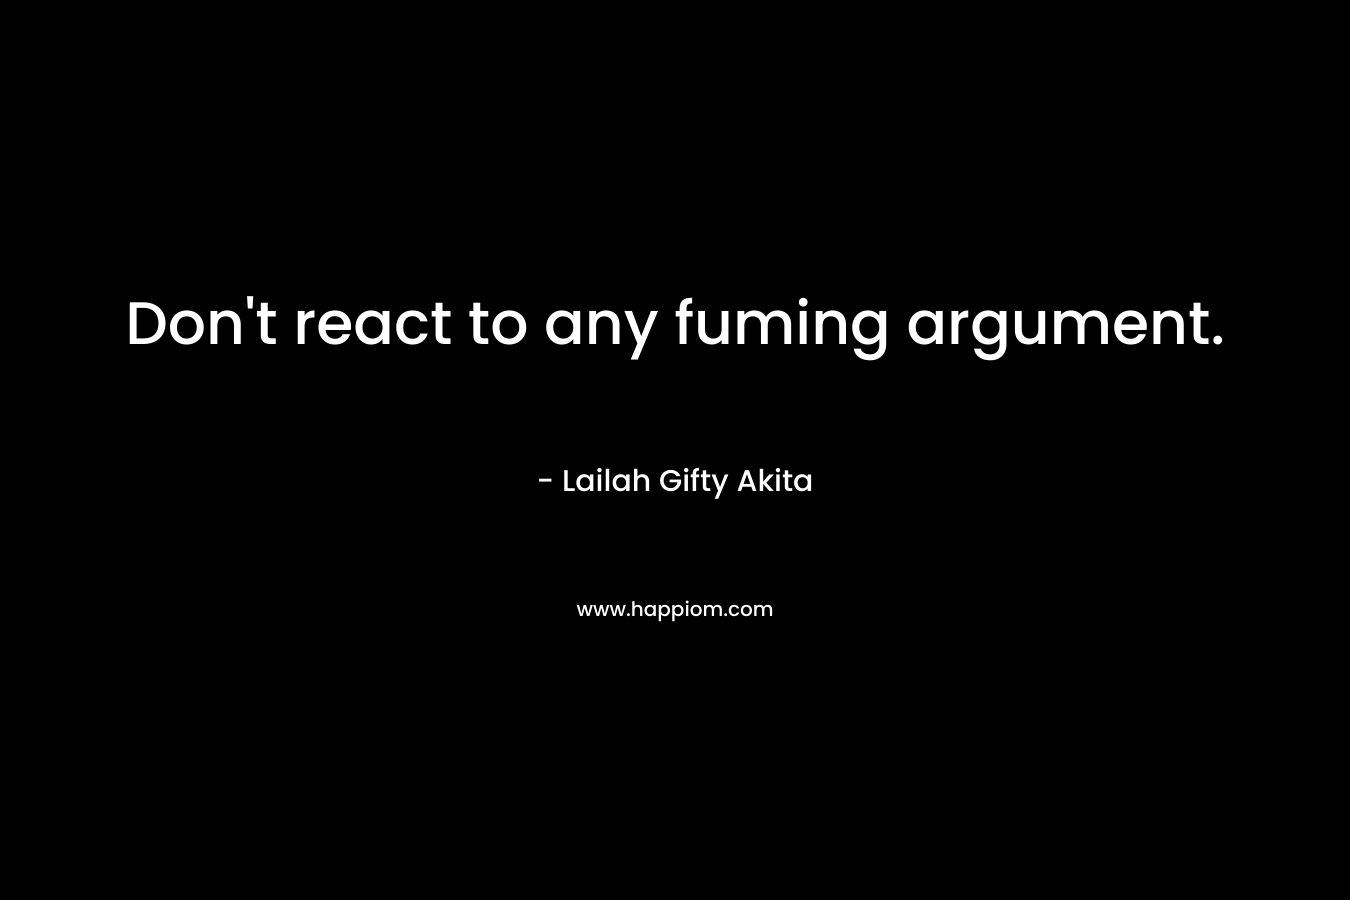 Don't react to any fuming argument.